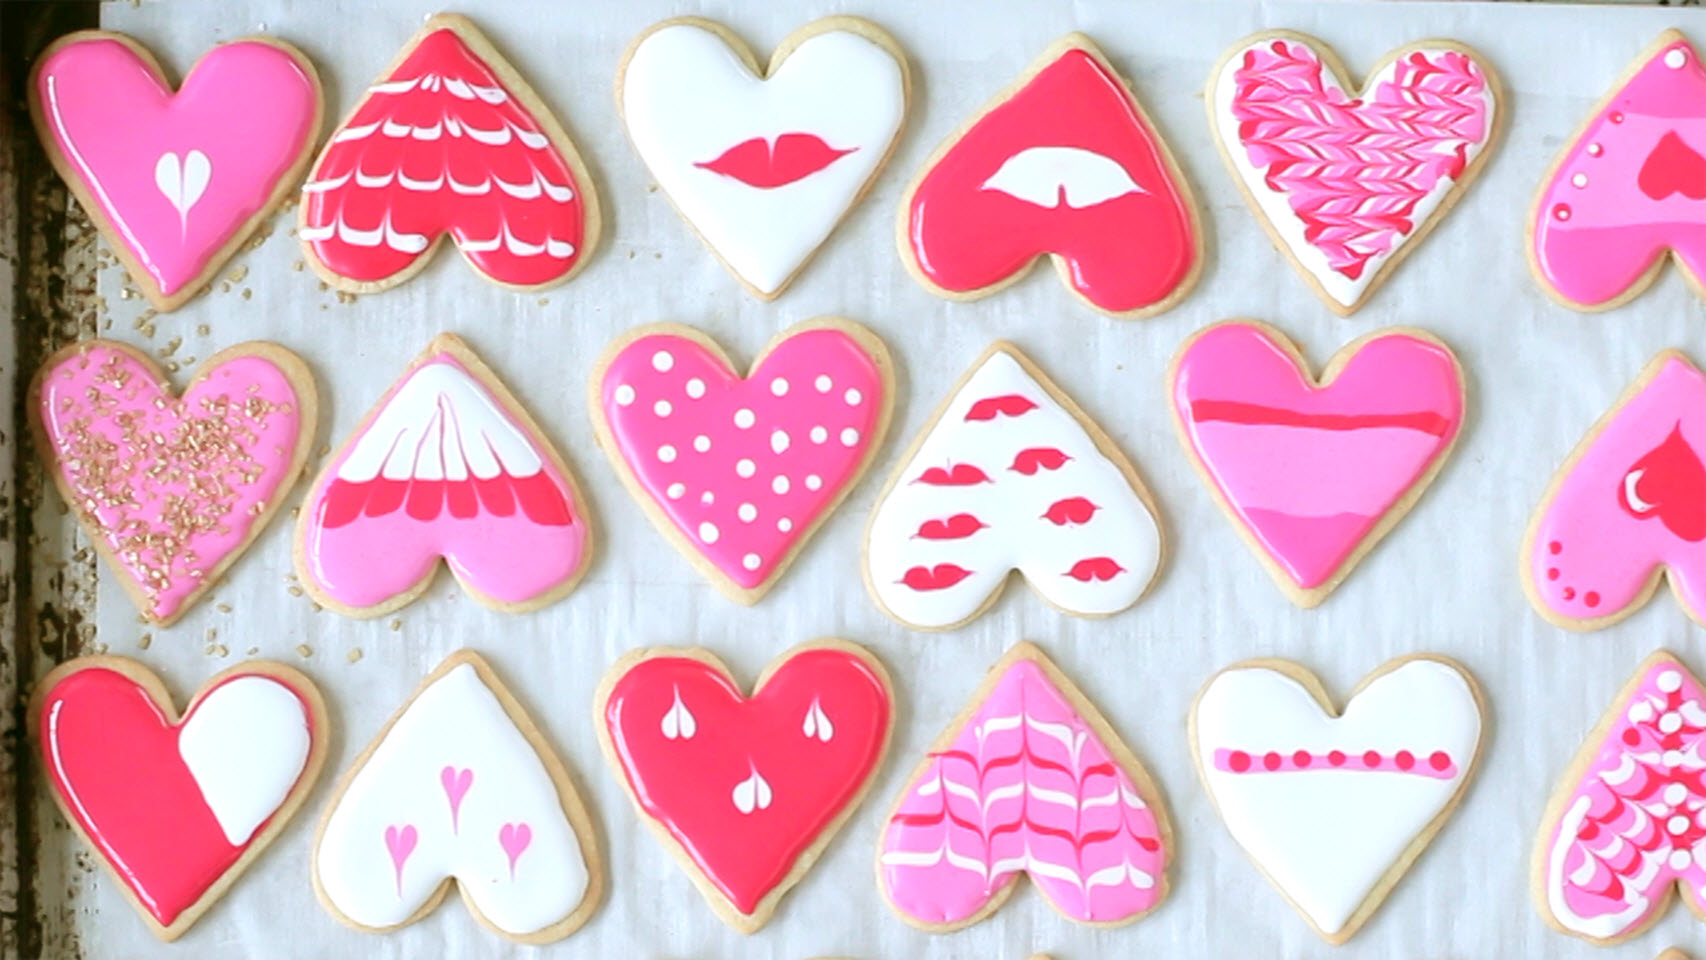 Heart Cookies Decorated with Royal Icing AllrecipesPhoto